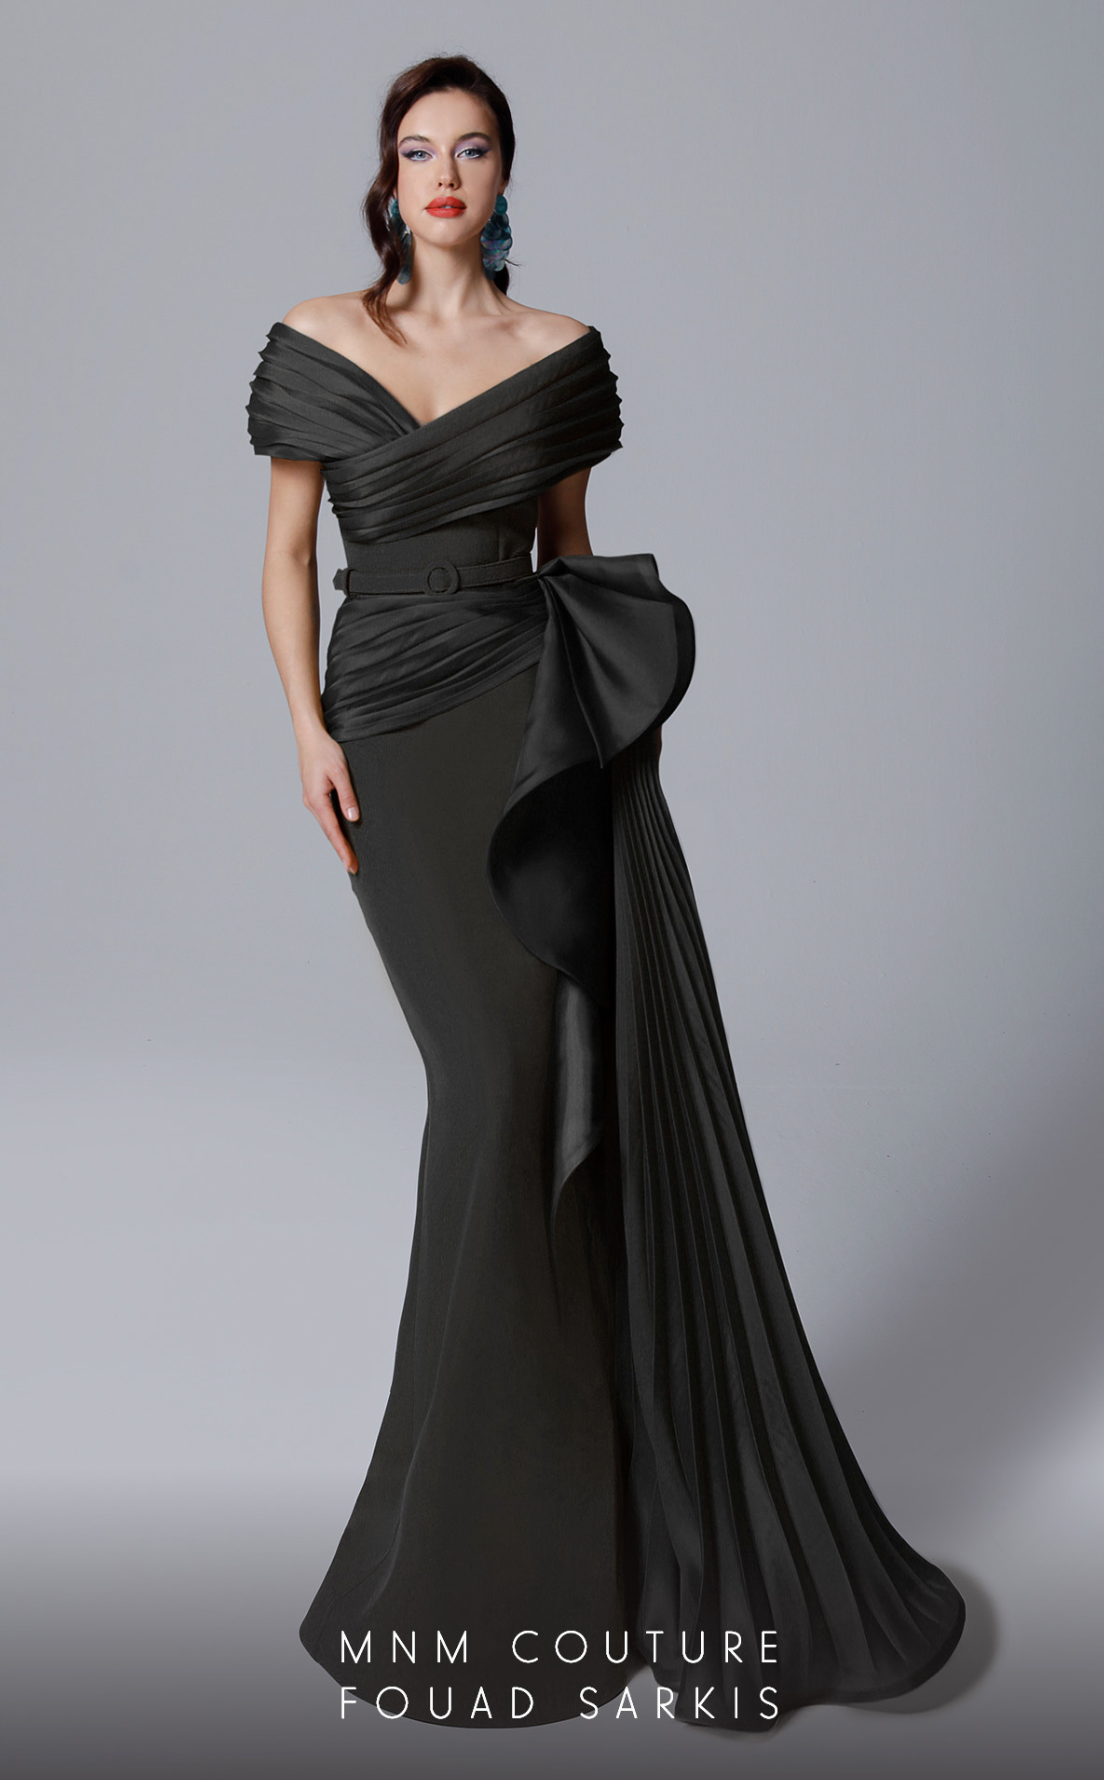 MNM Couture 2692 is the definition of elegance. This beautiful pleated off the shoulder gown with side train hugs curves and compliments all figures.